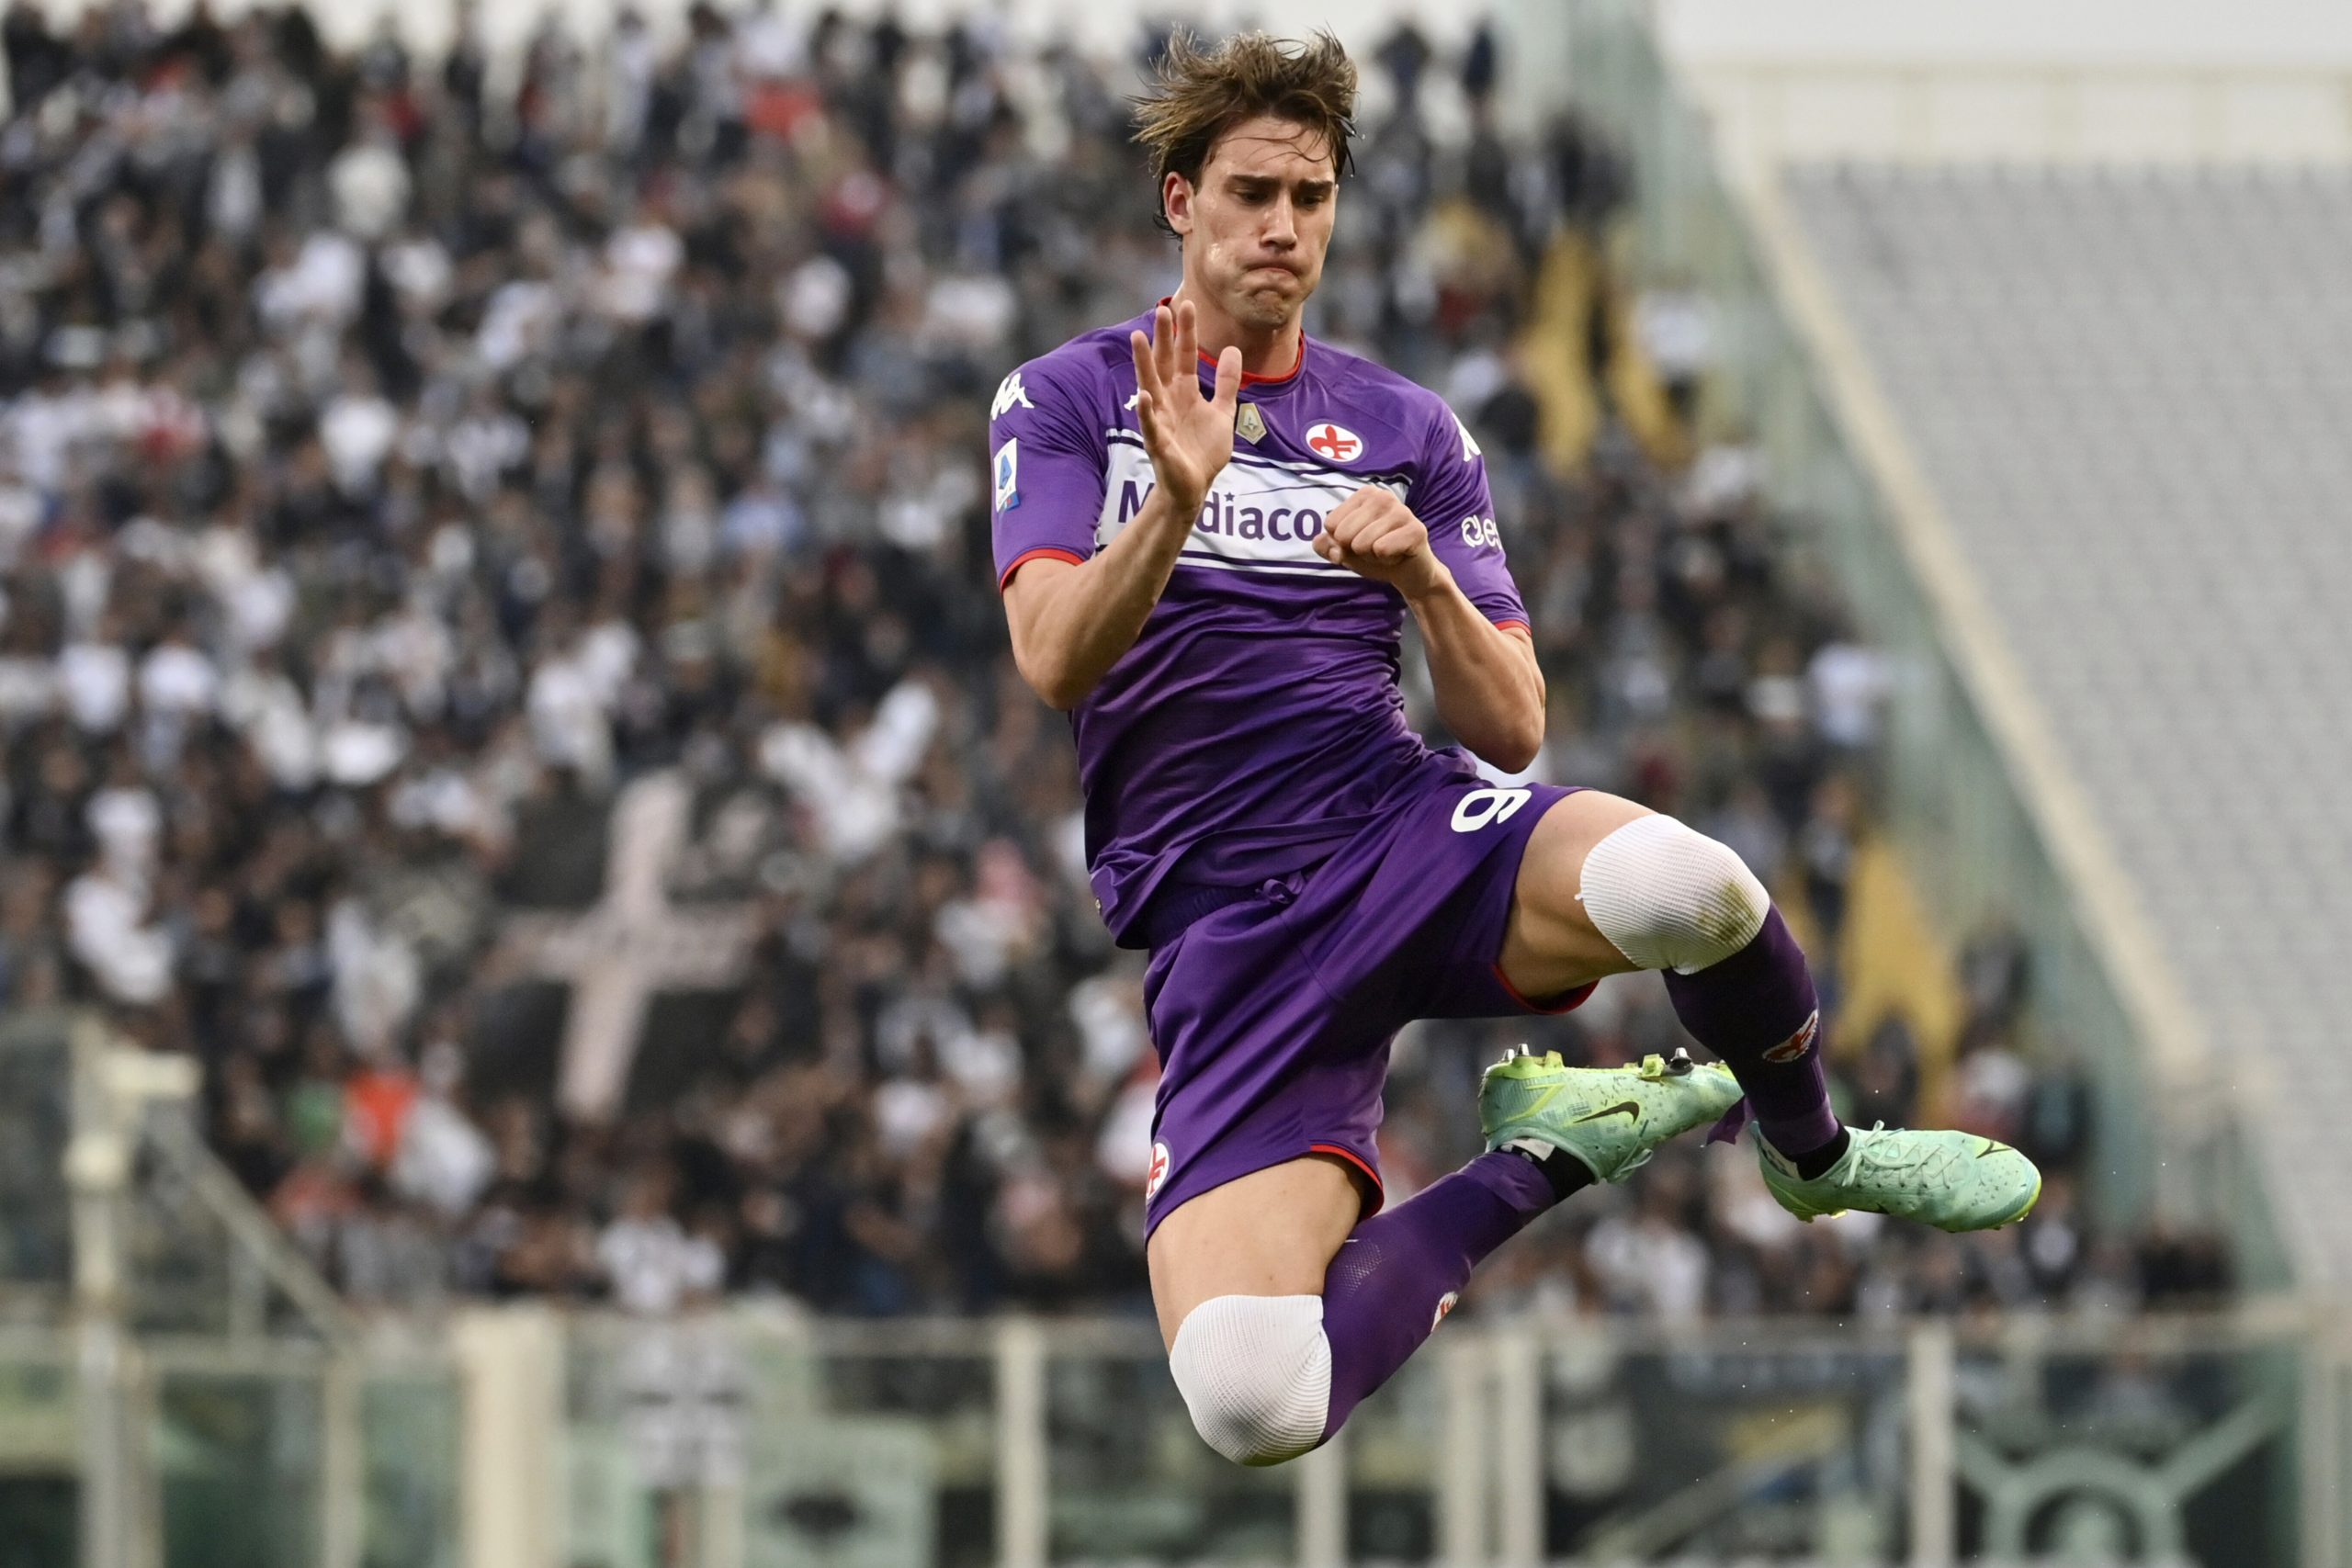 Fiorentina's Dusan Vlahovic celebrates after scoring during the Serie A soccer match between Fiorentina and Spezia, at the Artemio Franchi stadium in Florence, Italy, Sunday, Oct. 31, 2021. (Massimo Paolone/LaPresse via AP)